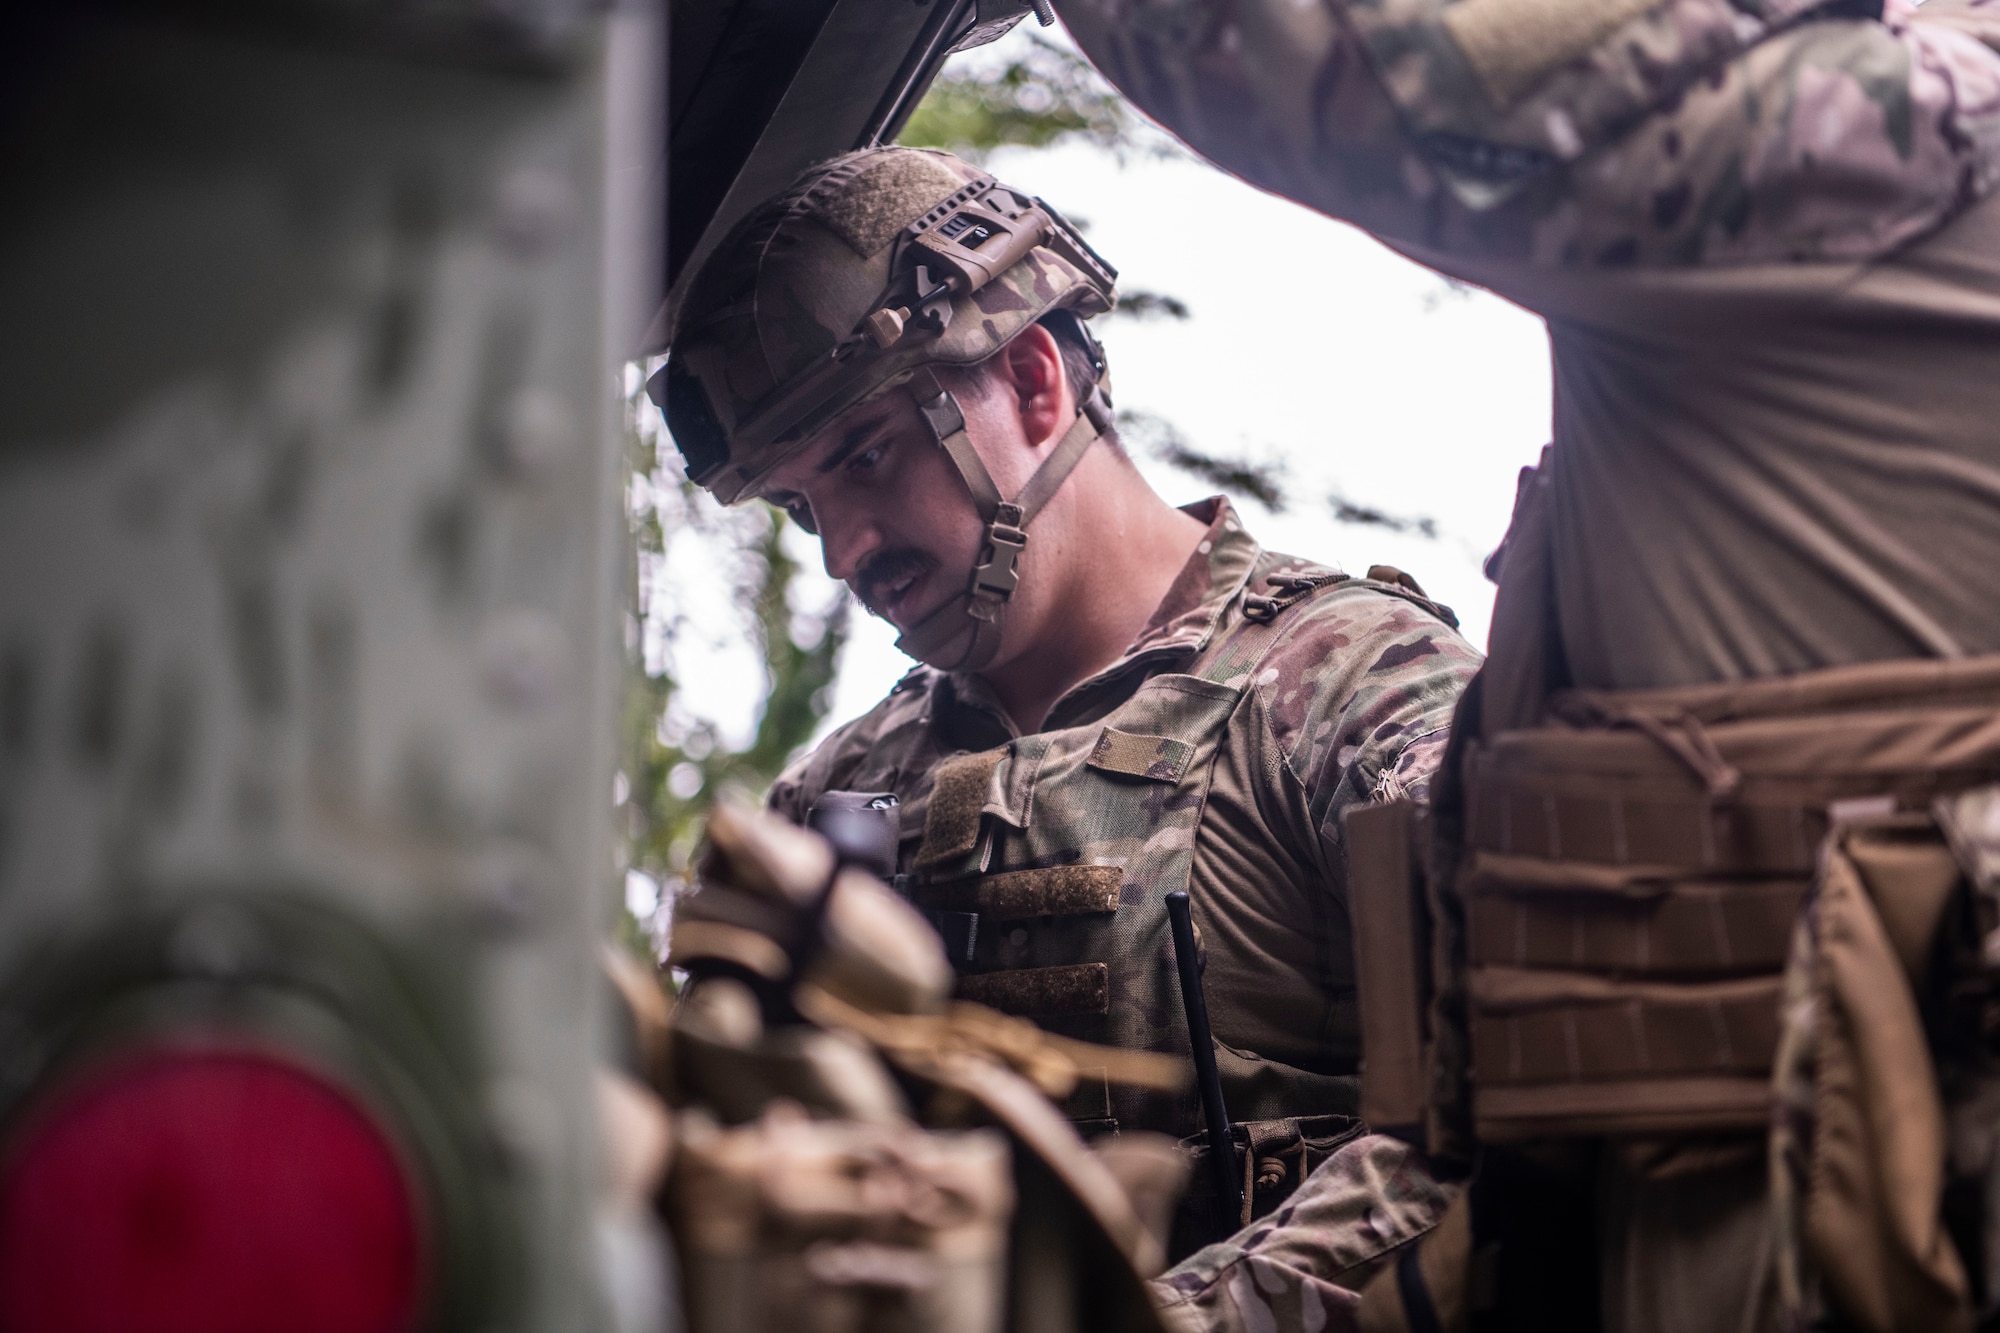 A U.S. Air Force member looks at equipment in the trunk of a Humvee.